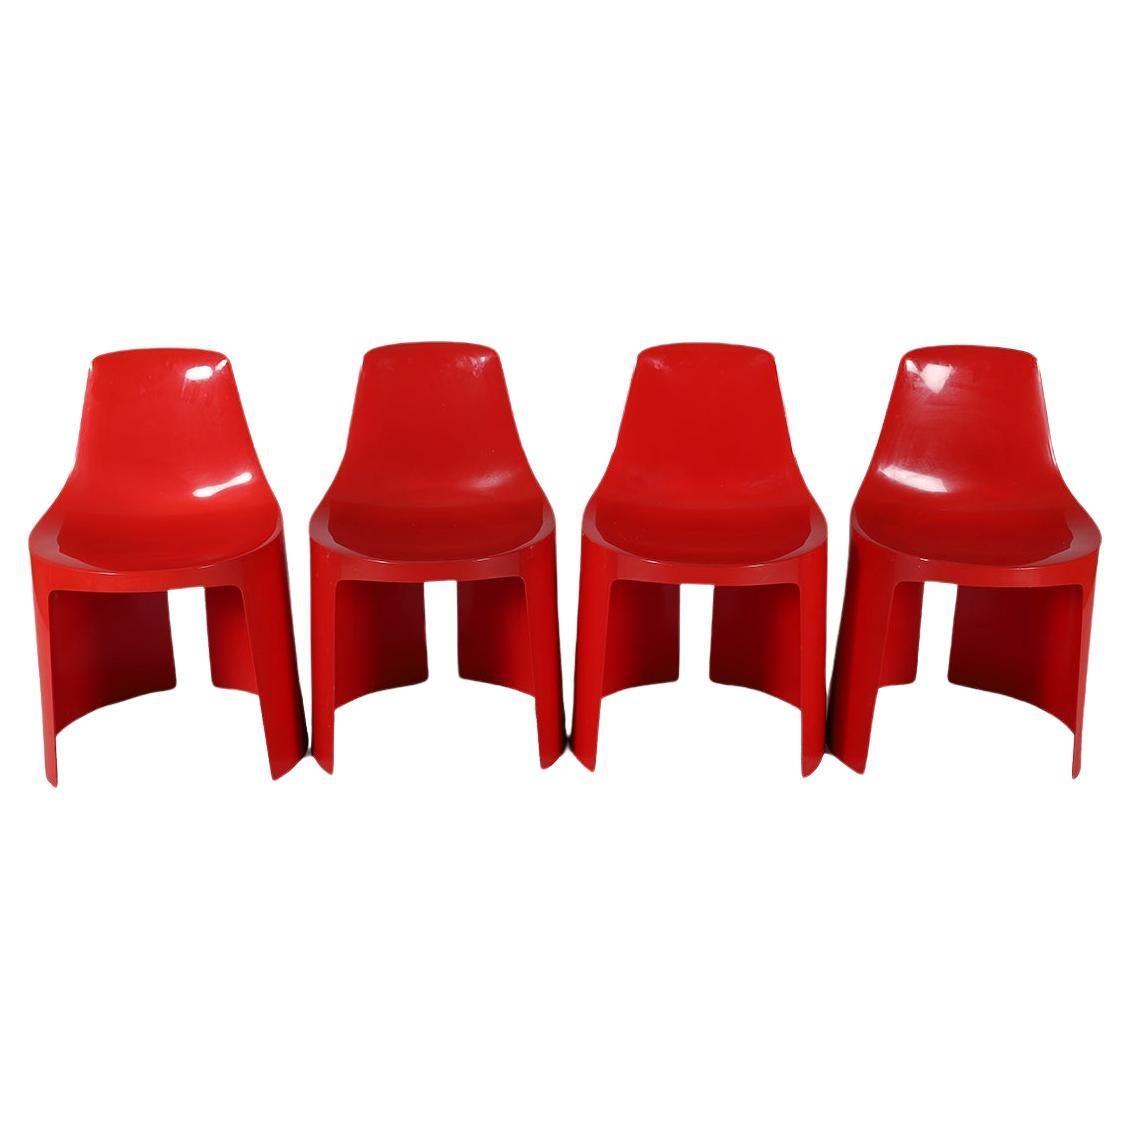  'Umbo' Red Molded Plastic Stacking Chair Set by Kay LeRoy Ruggles